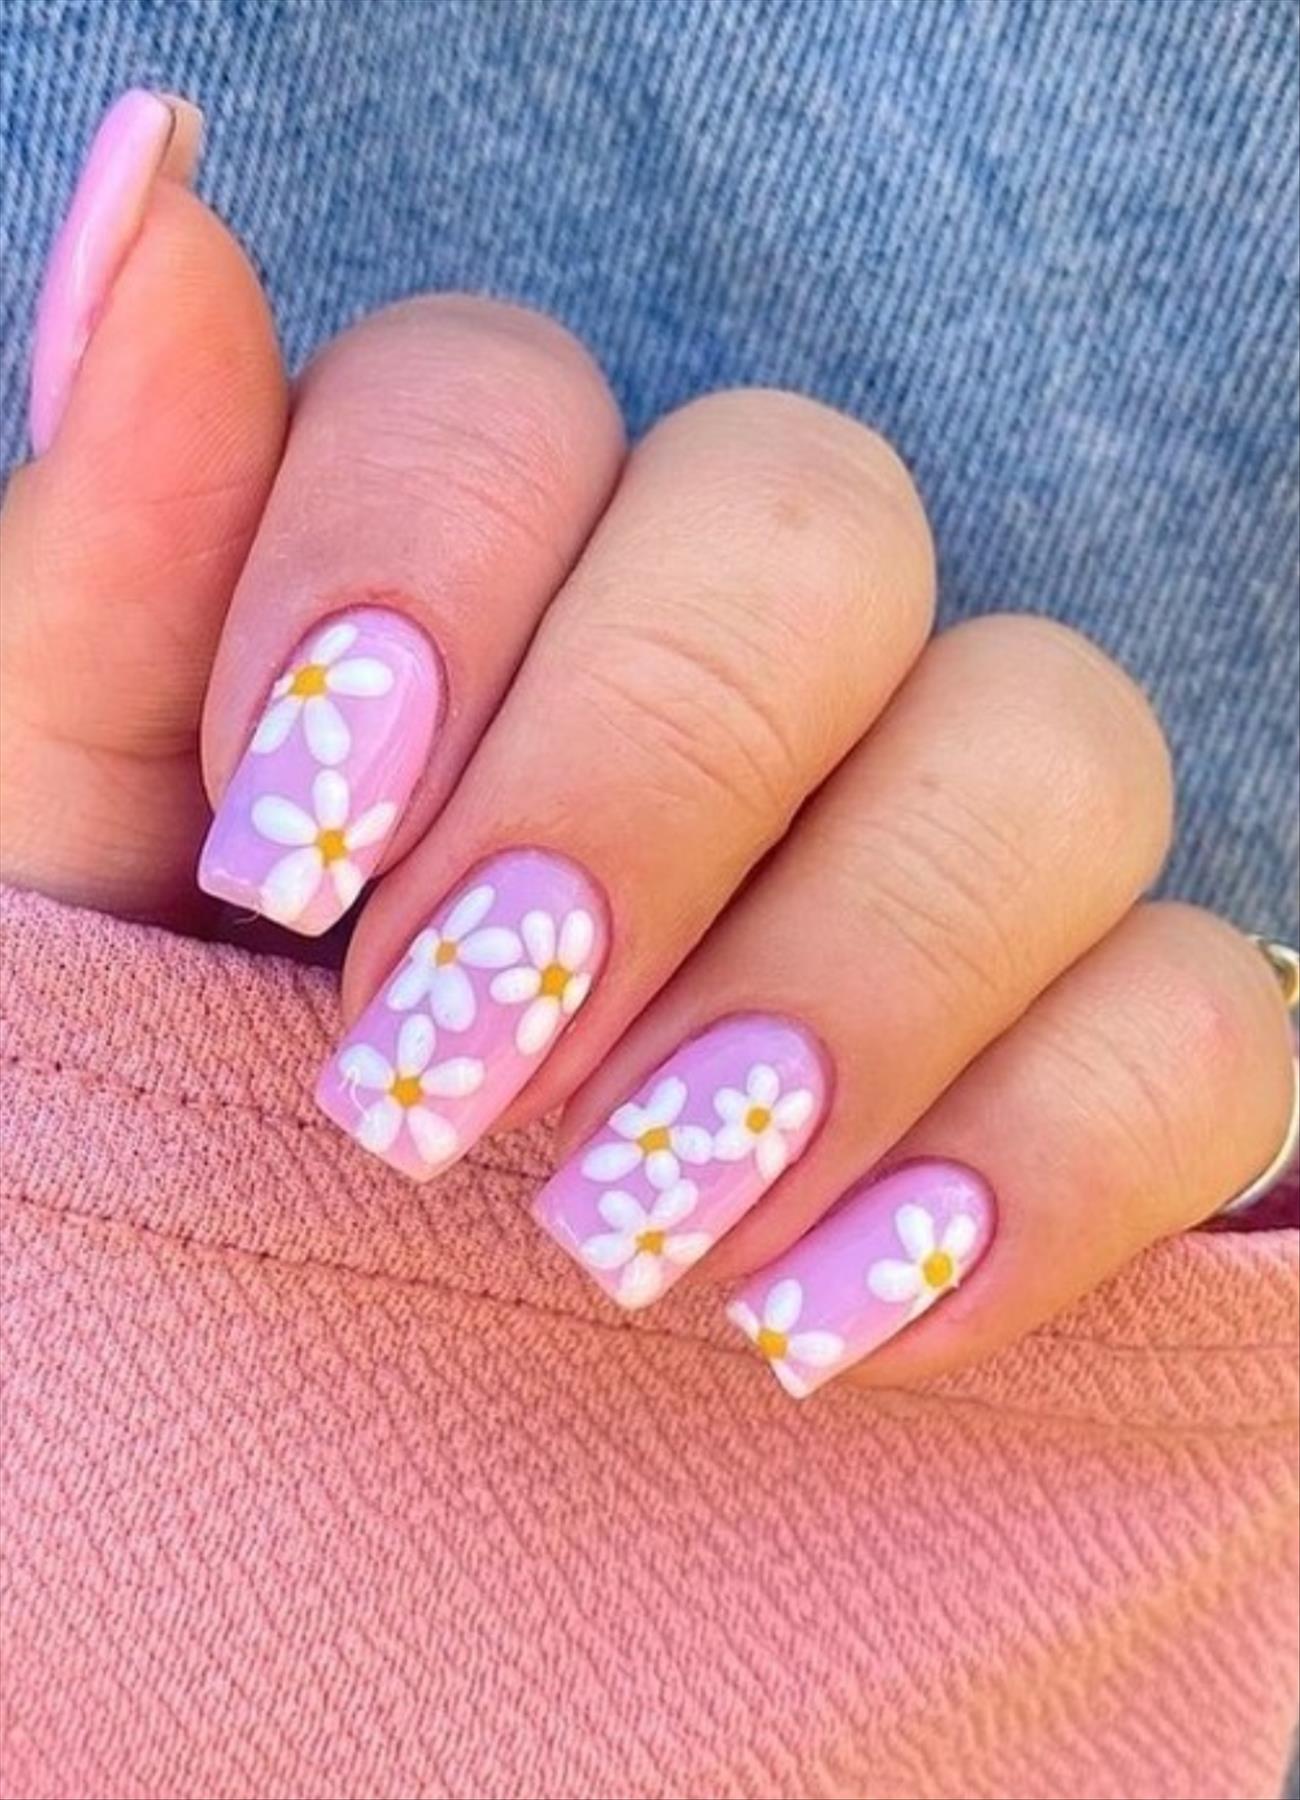 Pretty short pink nails perfect for the next mani!